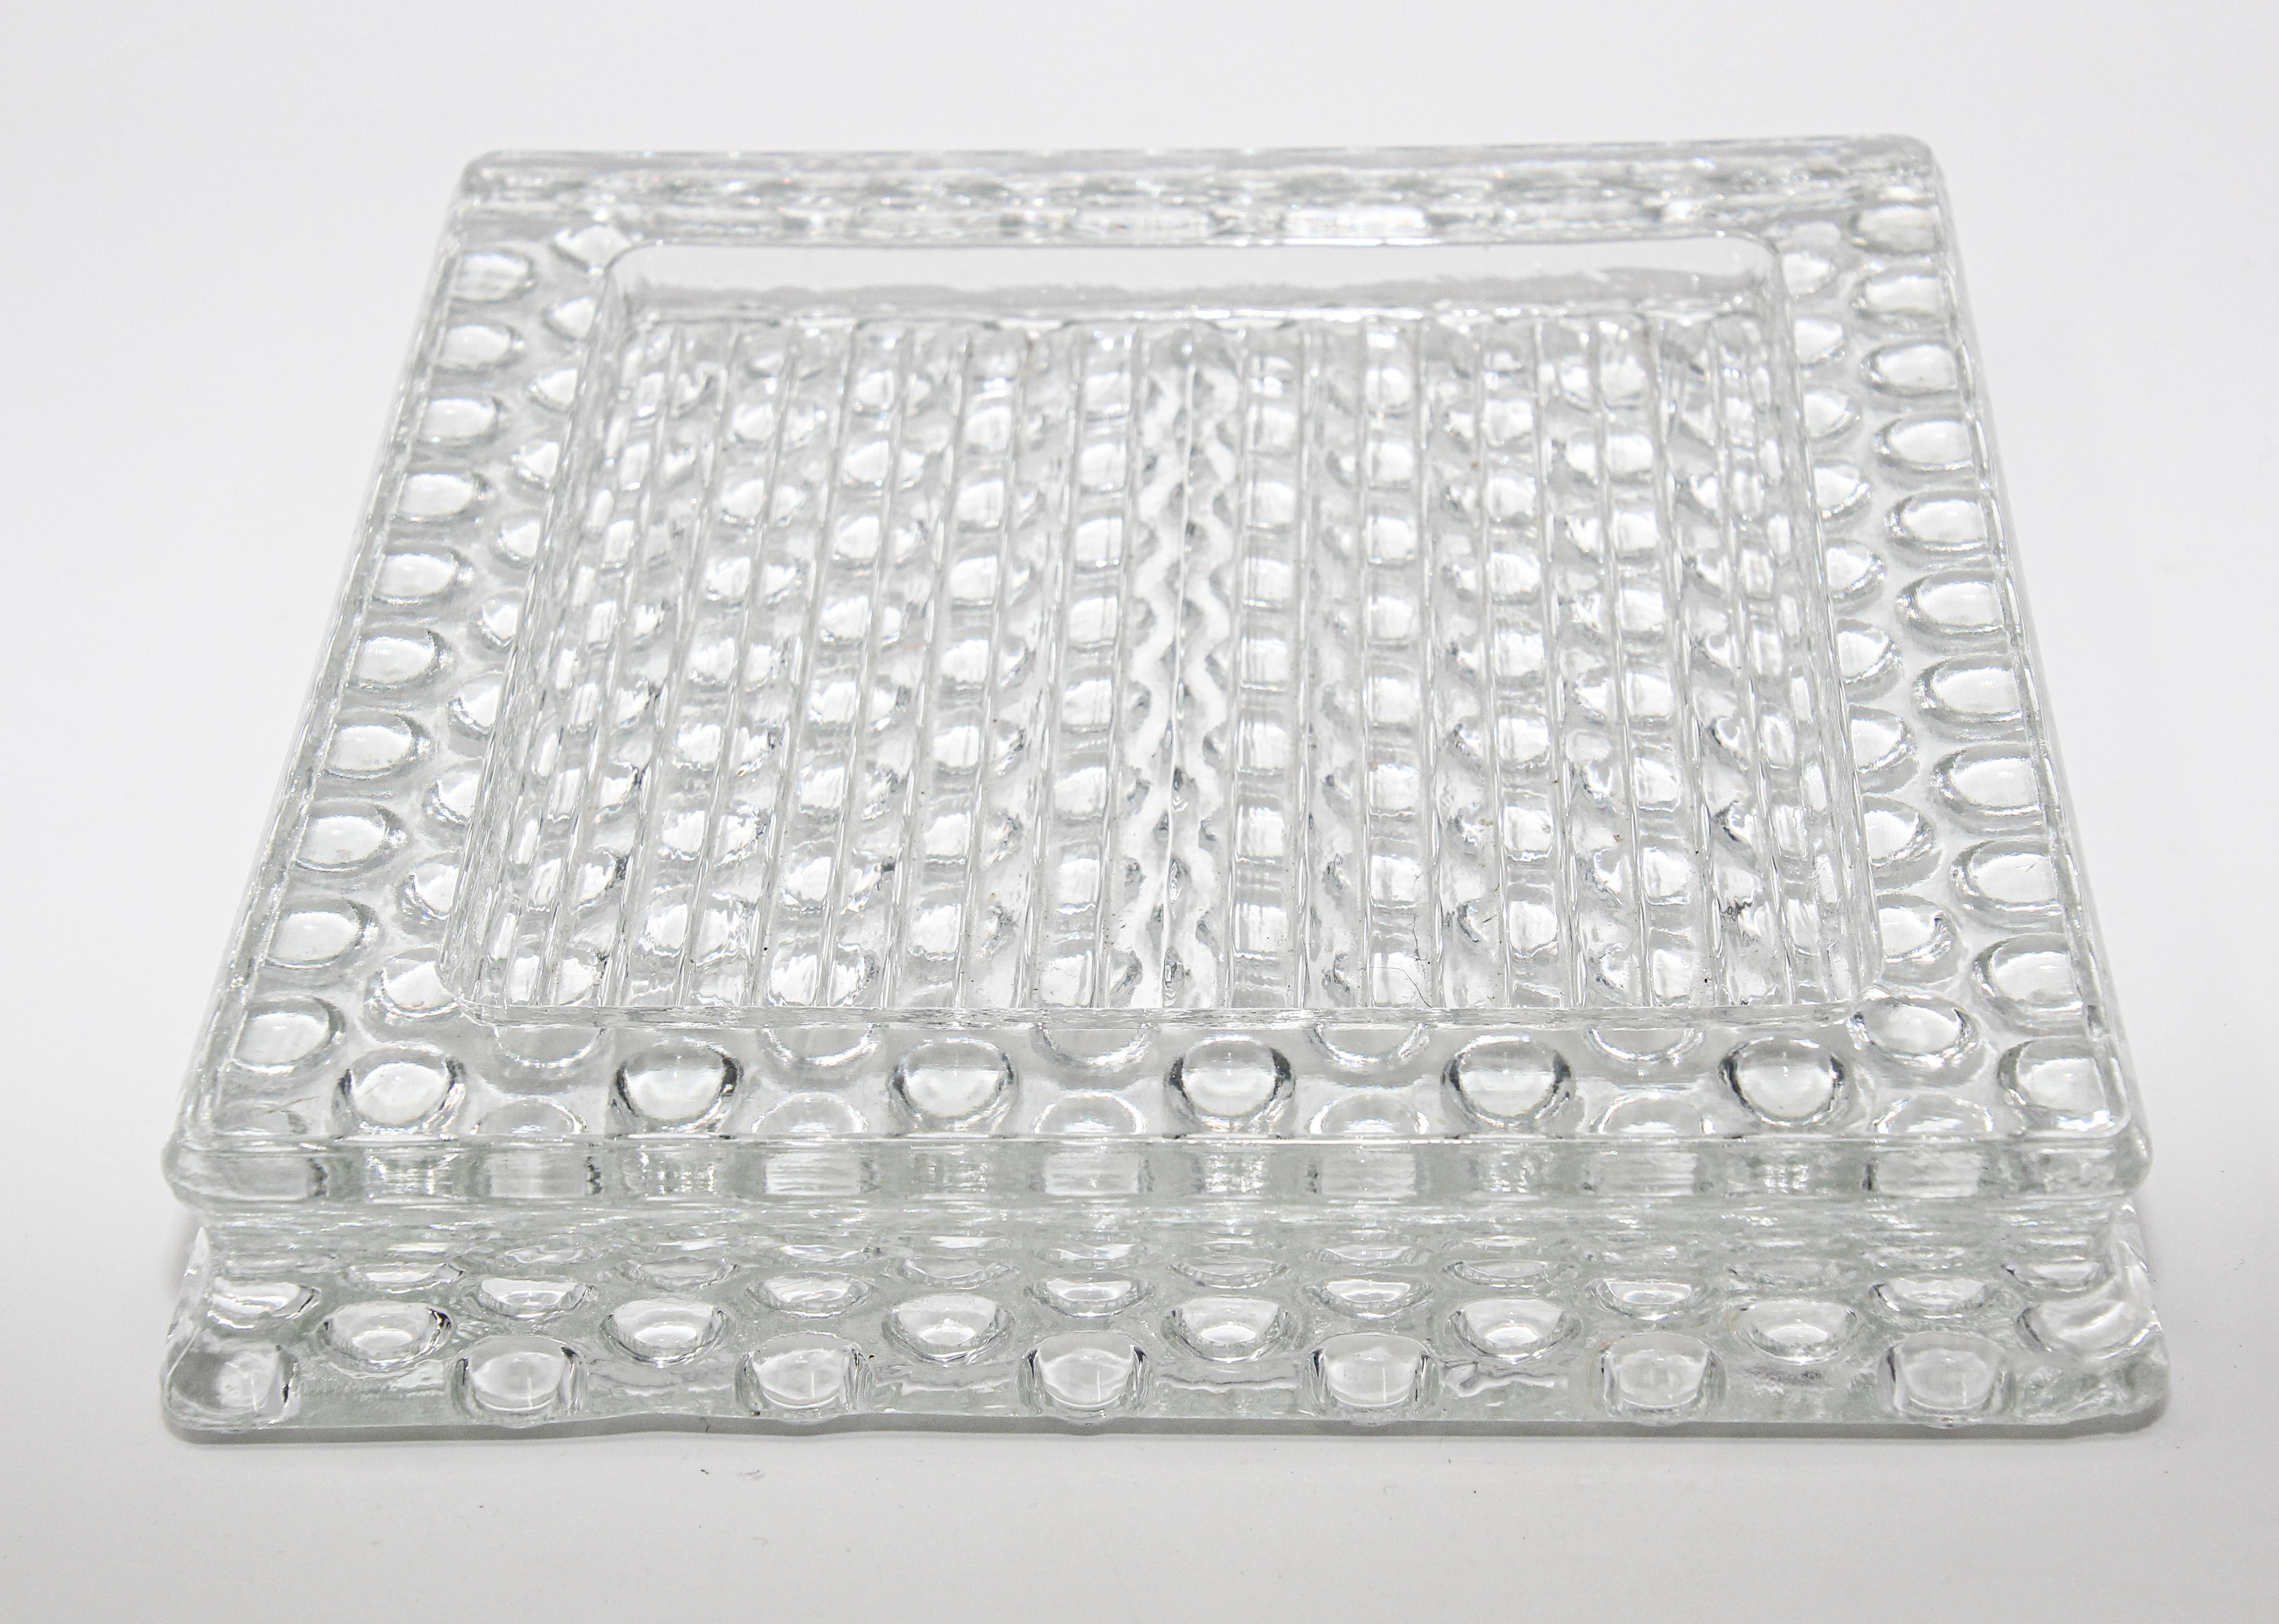 Beautiful large square French glass ashtray, 1930s design,
mid-20th century heavy cut glass ashtray in Bauhaus, Art Deco style.
Thick clear glass slab tray or desk tidy.
Square shape, a perfect accessory for the desk as a catchall or a cigar